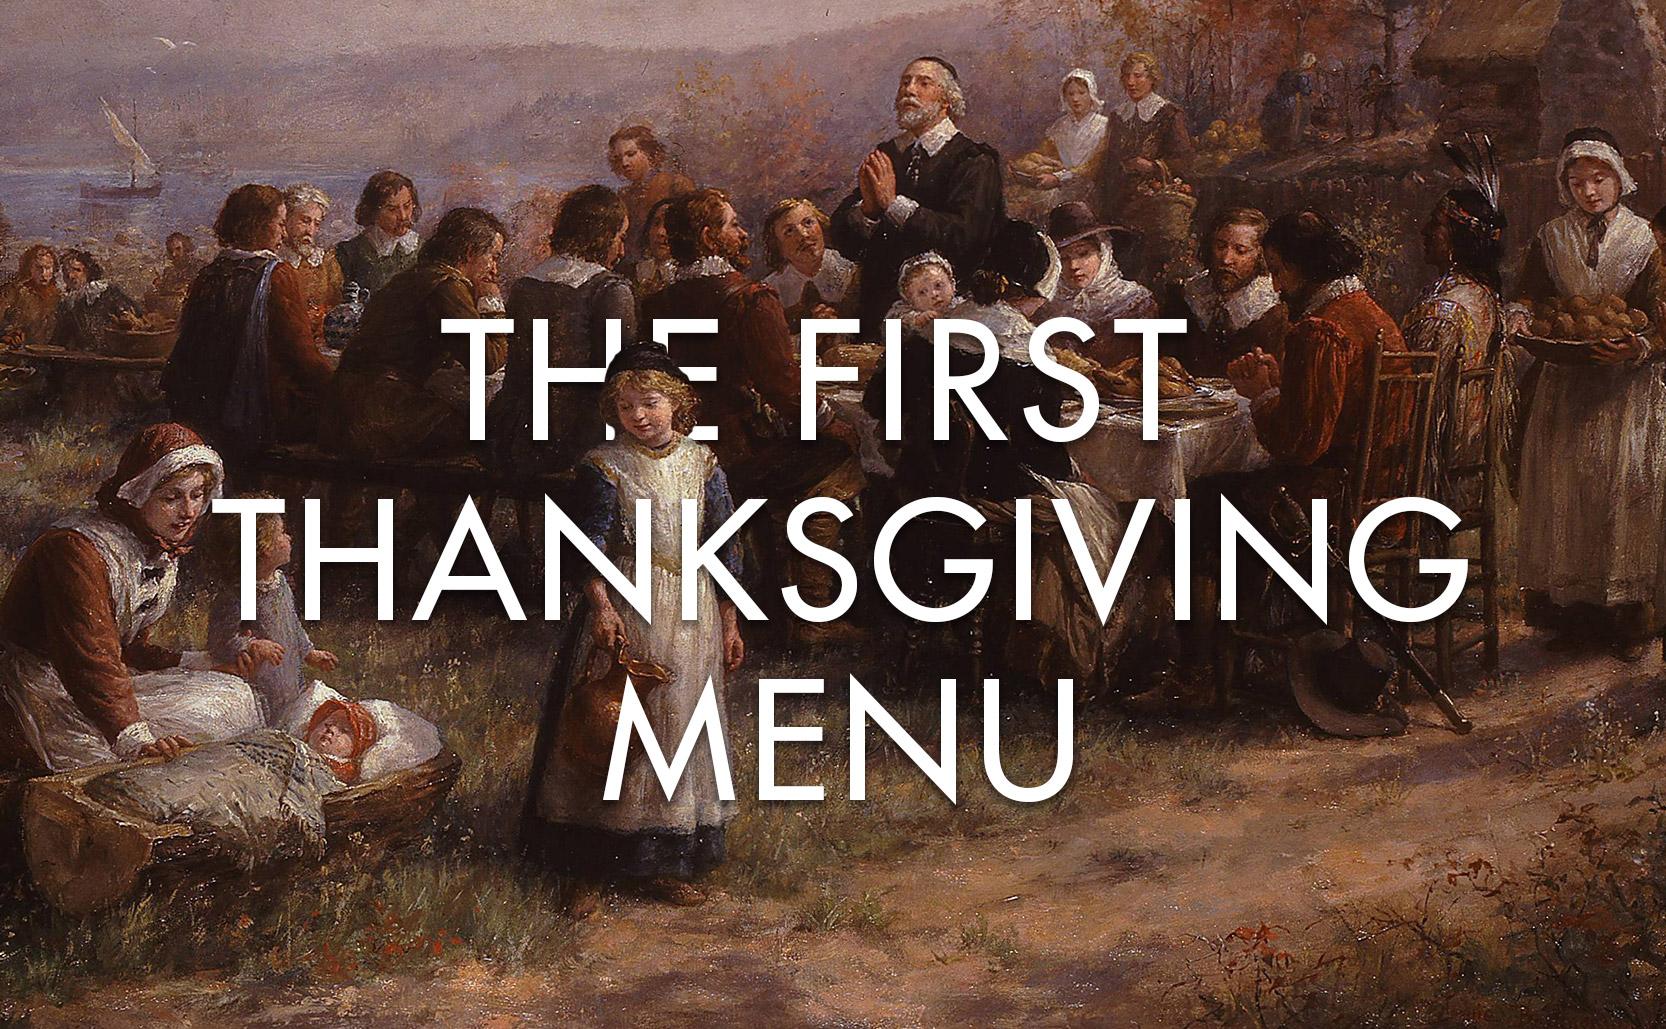 You are currently viewing the First Thanksgiving Menu